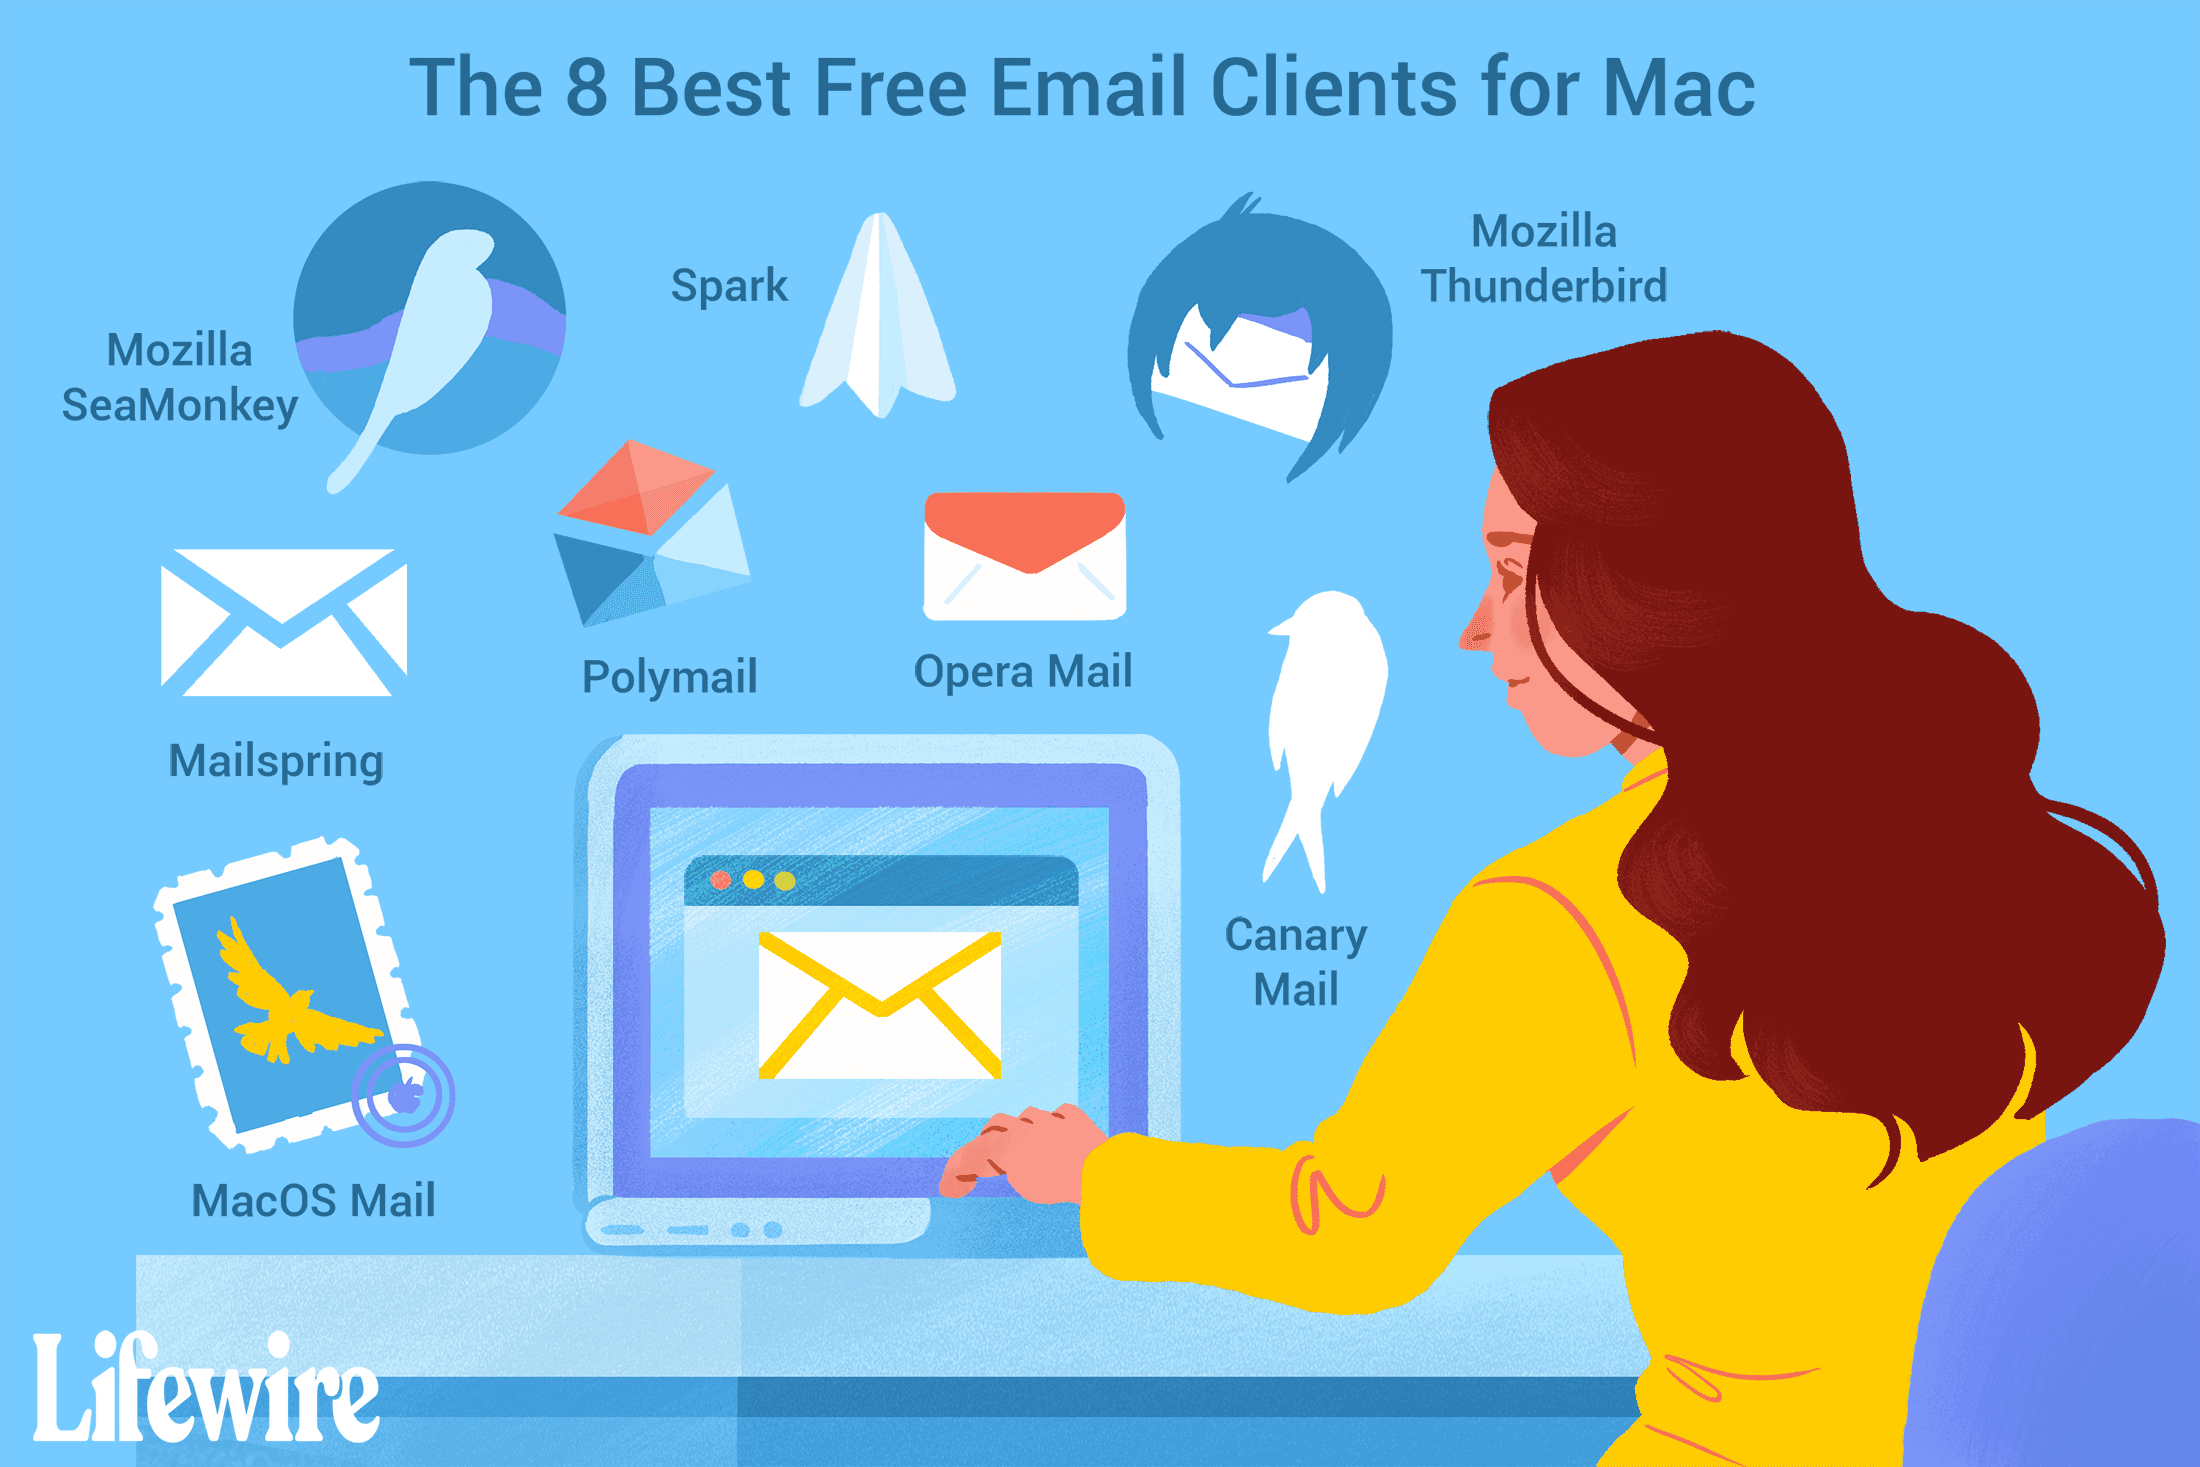 best windows mail client for mac os email